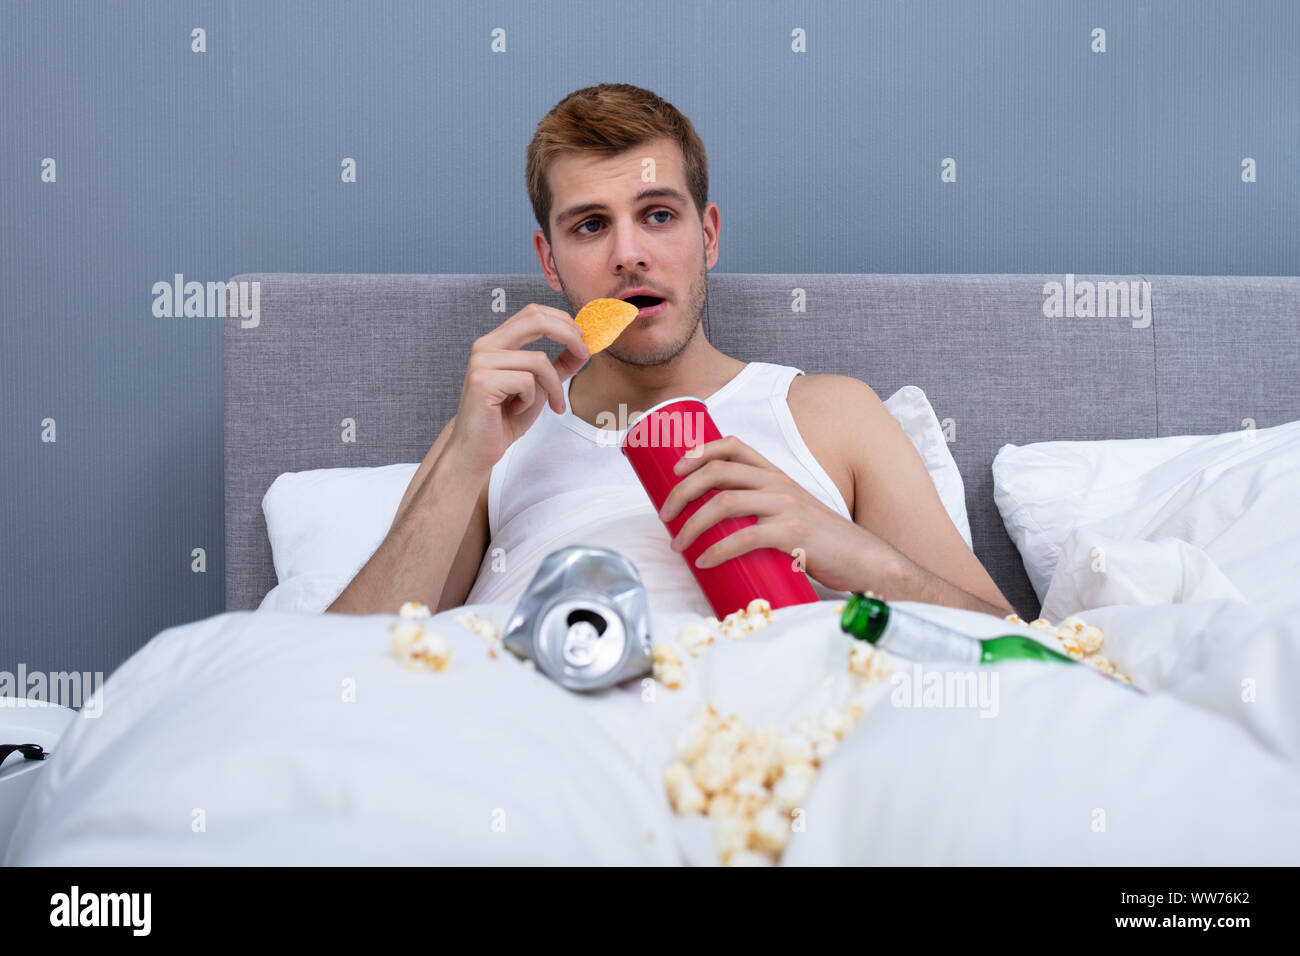 Man Eating In Messy Bed At Home Stock Photo